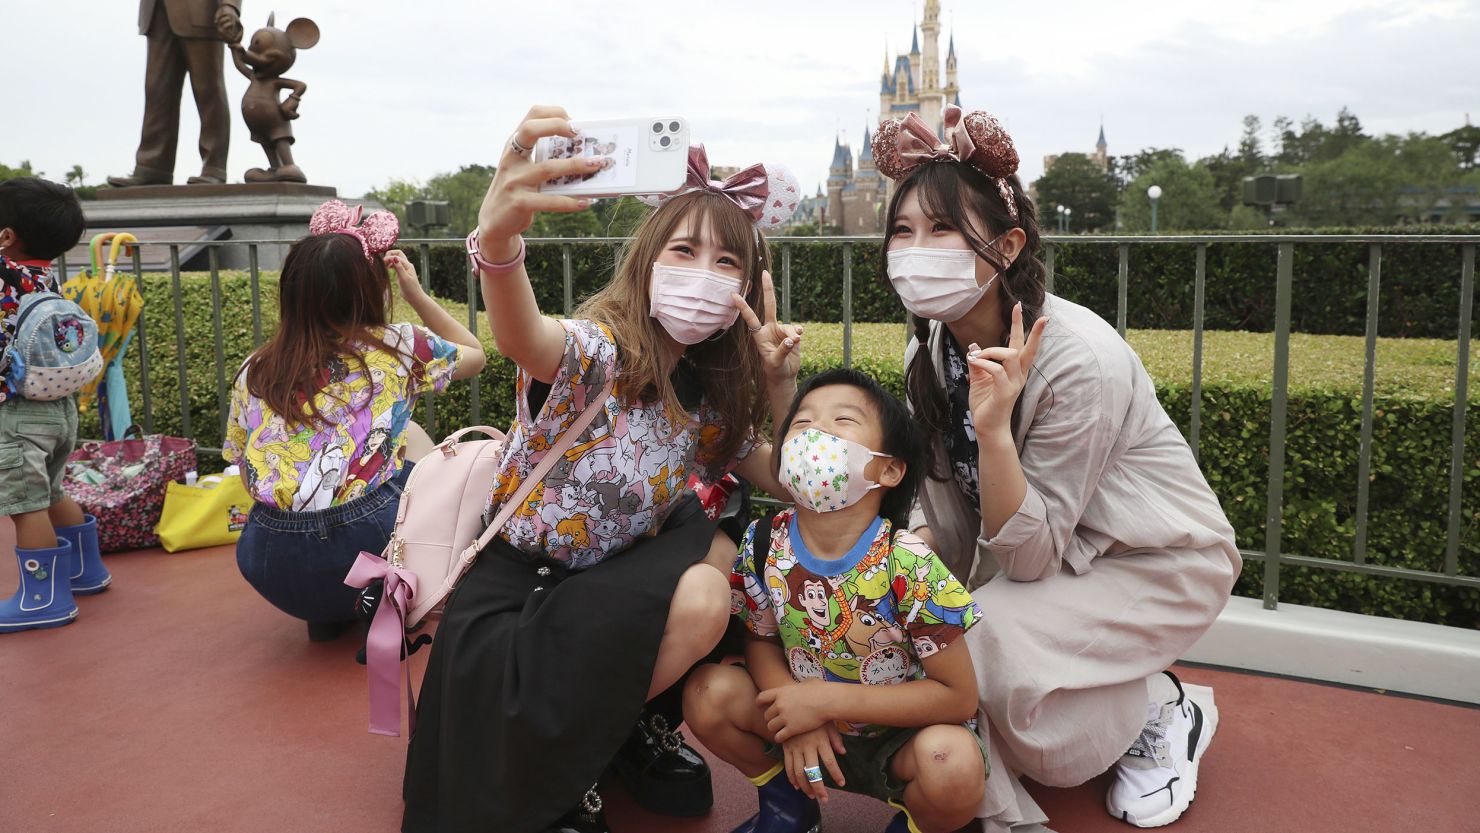 Visitors pose for photo during the reopening of Tokyo Disneyland on July 1, 2020. Disneyland reopened on the same day for the first time in about four months due to an outspread of coronavirus COVID-19. ( The Yomiuri Shimbun via AP Images )